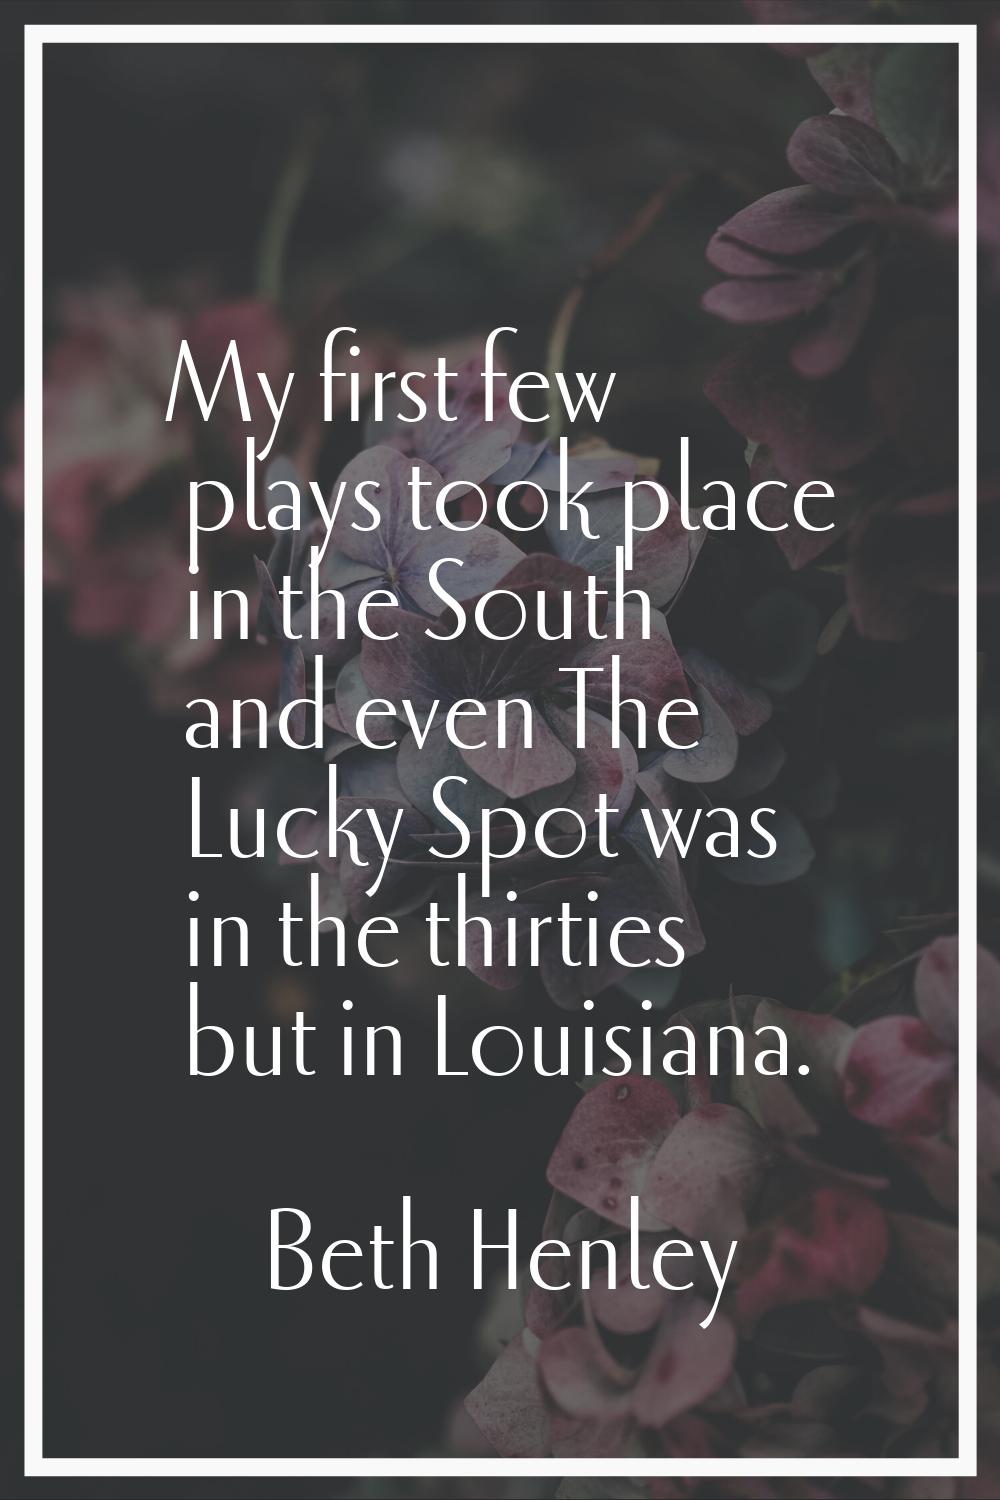 My first few plays took place in the South and even The Lucky Spot was in the thirties but in Louis